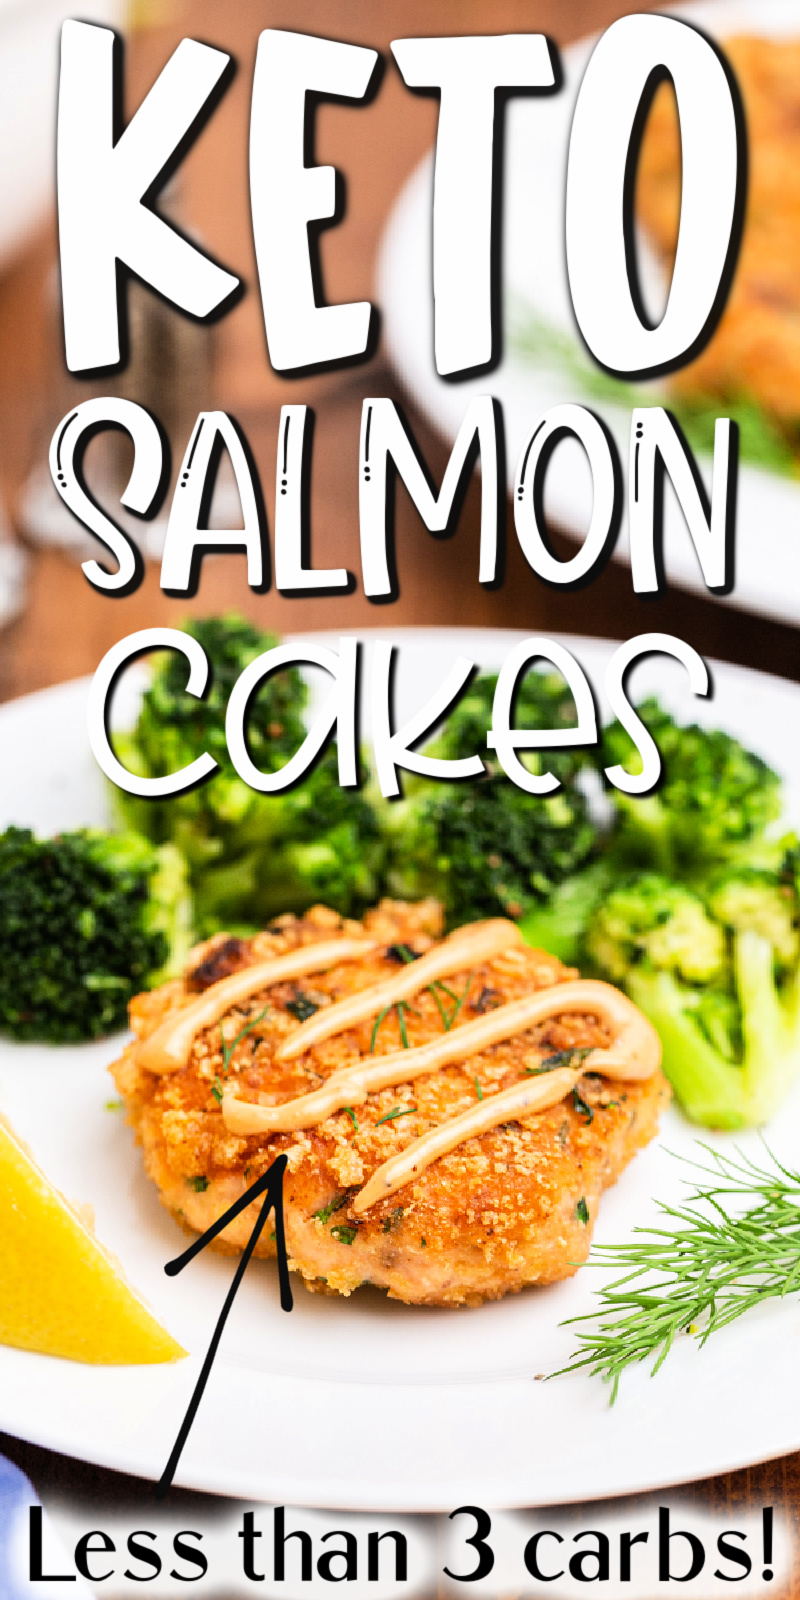 Keto Salmon Cakes (Salmon Patties) - These keto salmon cakes (salmon patties) are a delicious way to enjoy salmon. Packed with fresh salmon (no cans here) and fresh herbs, even the pickiest eater will love being low carb! #keto #lowcarb #glutenfree #salmon #fish #cake #patty #patties #easy #fresh #recipe